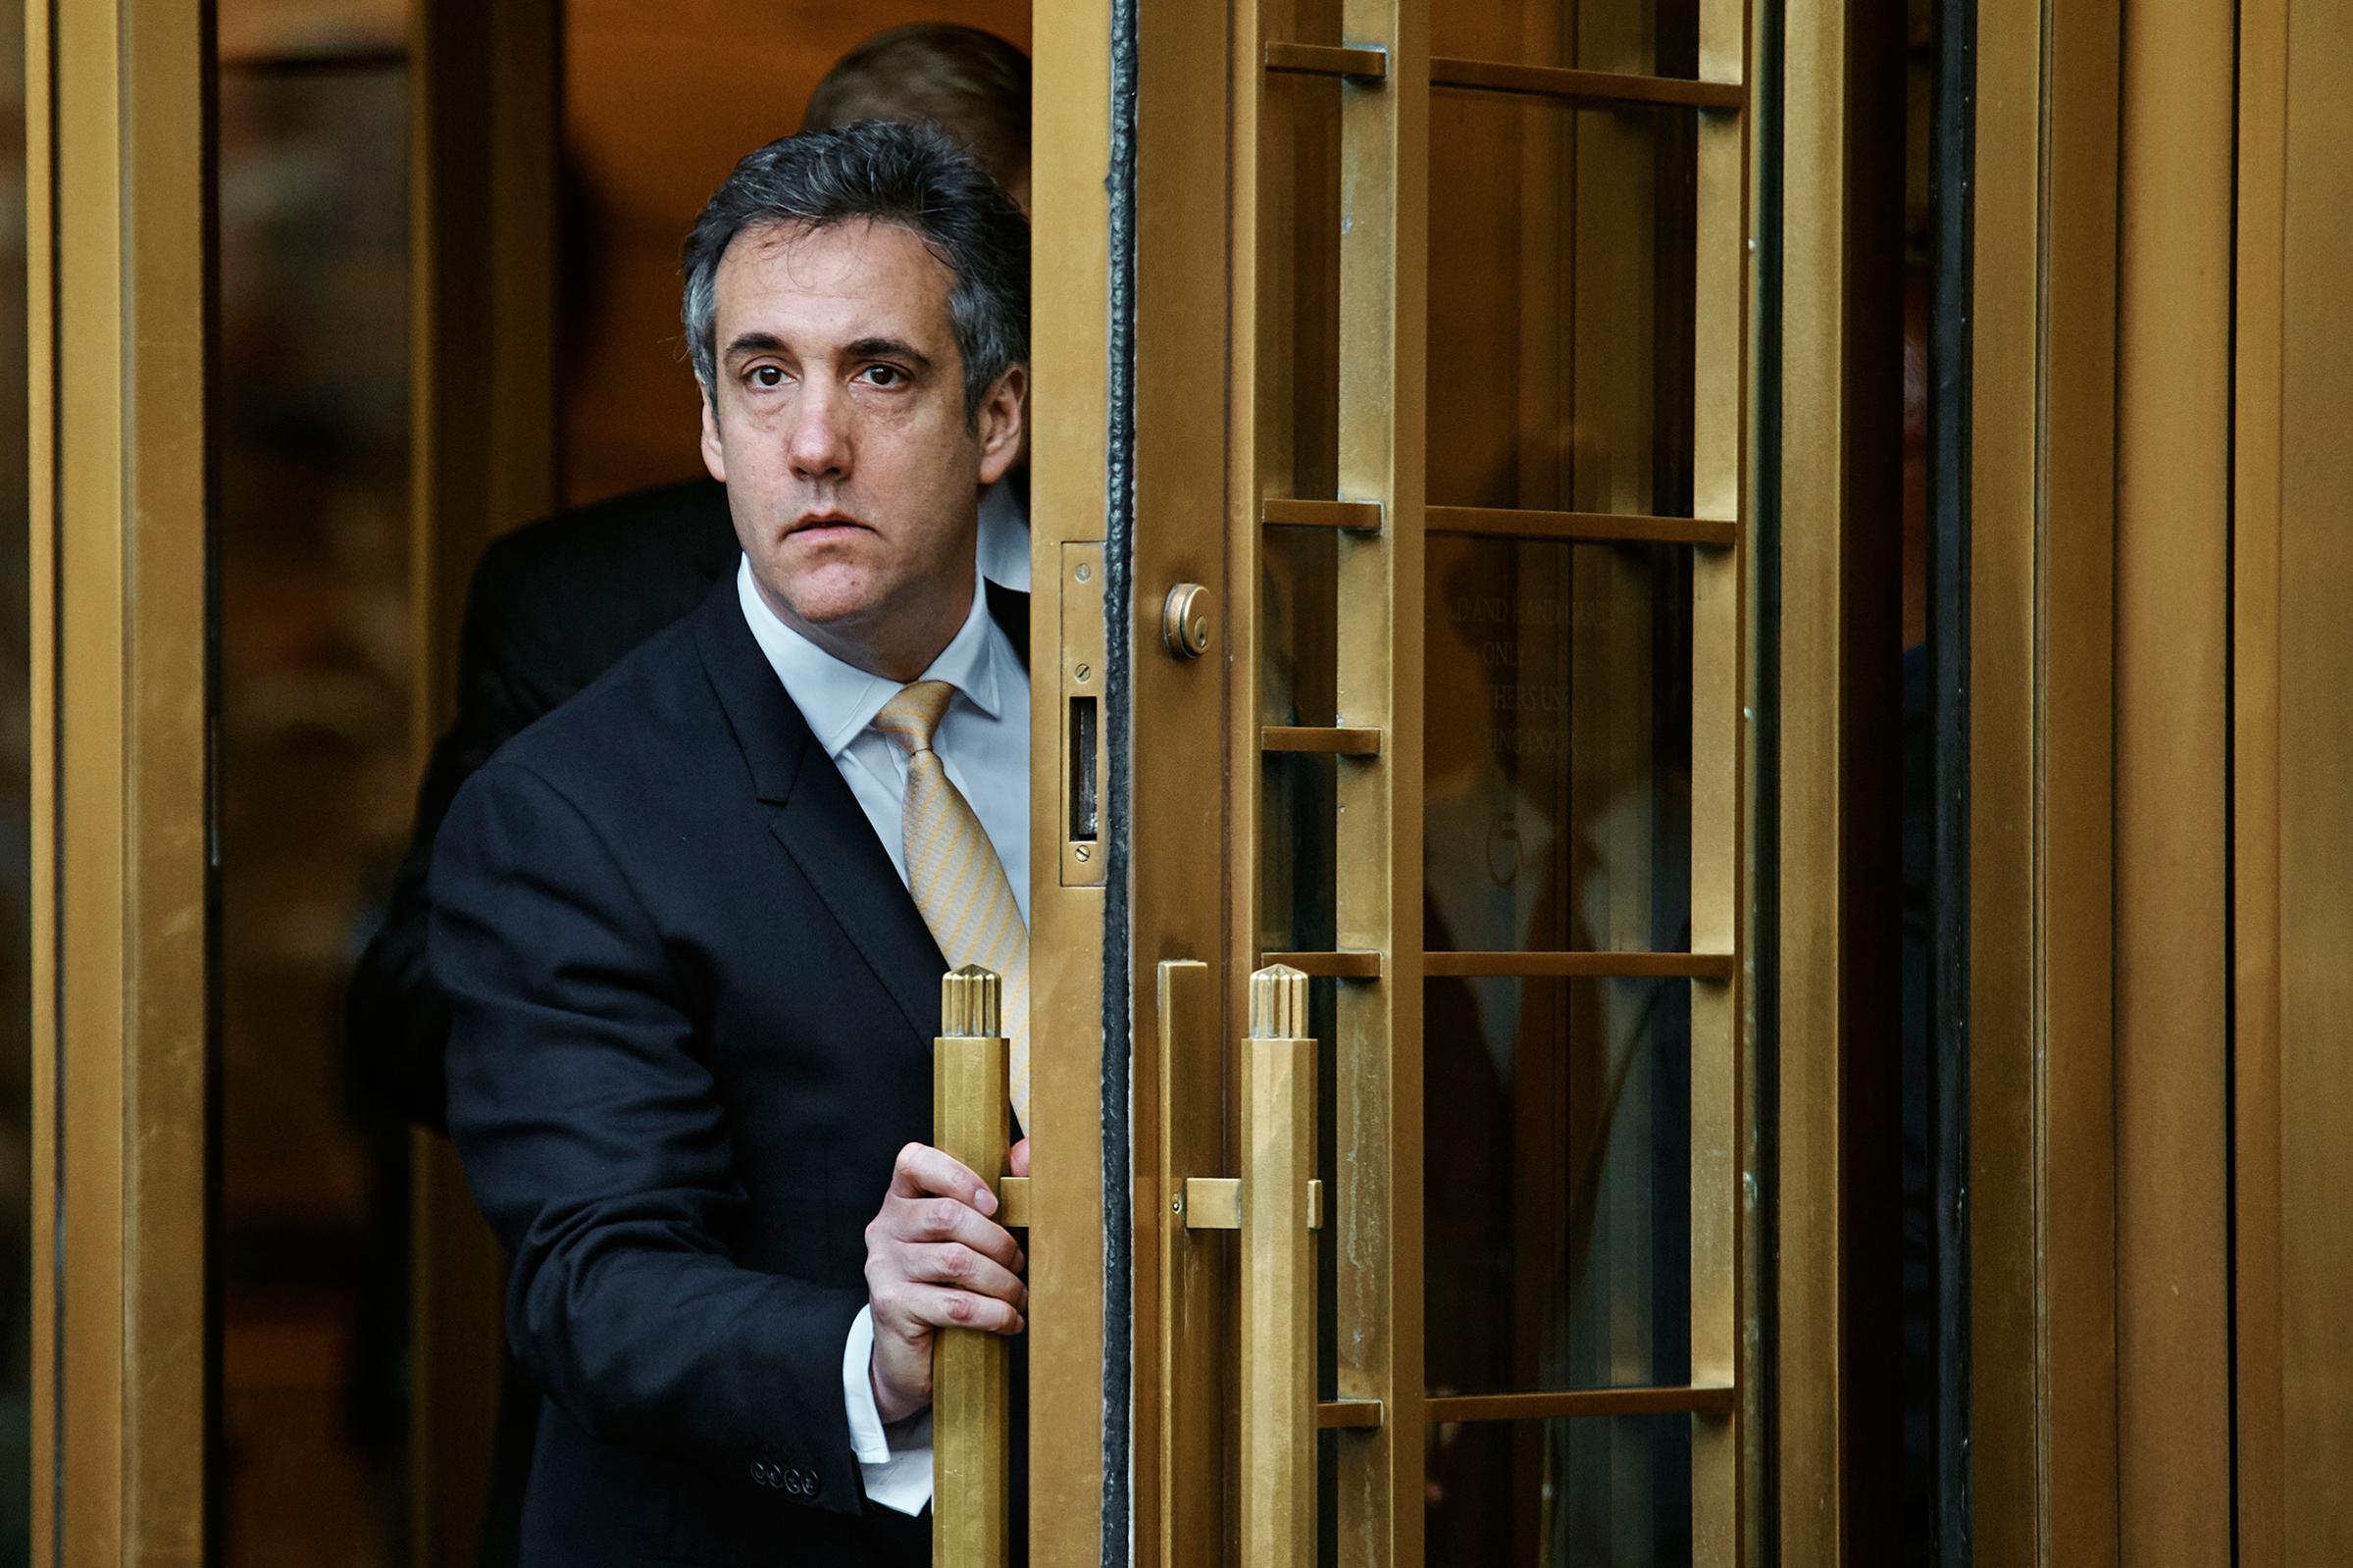 Michael Cohen, the President’s longtime personal lawyer, leaves federal court in Manhattan on Aug. 21